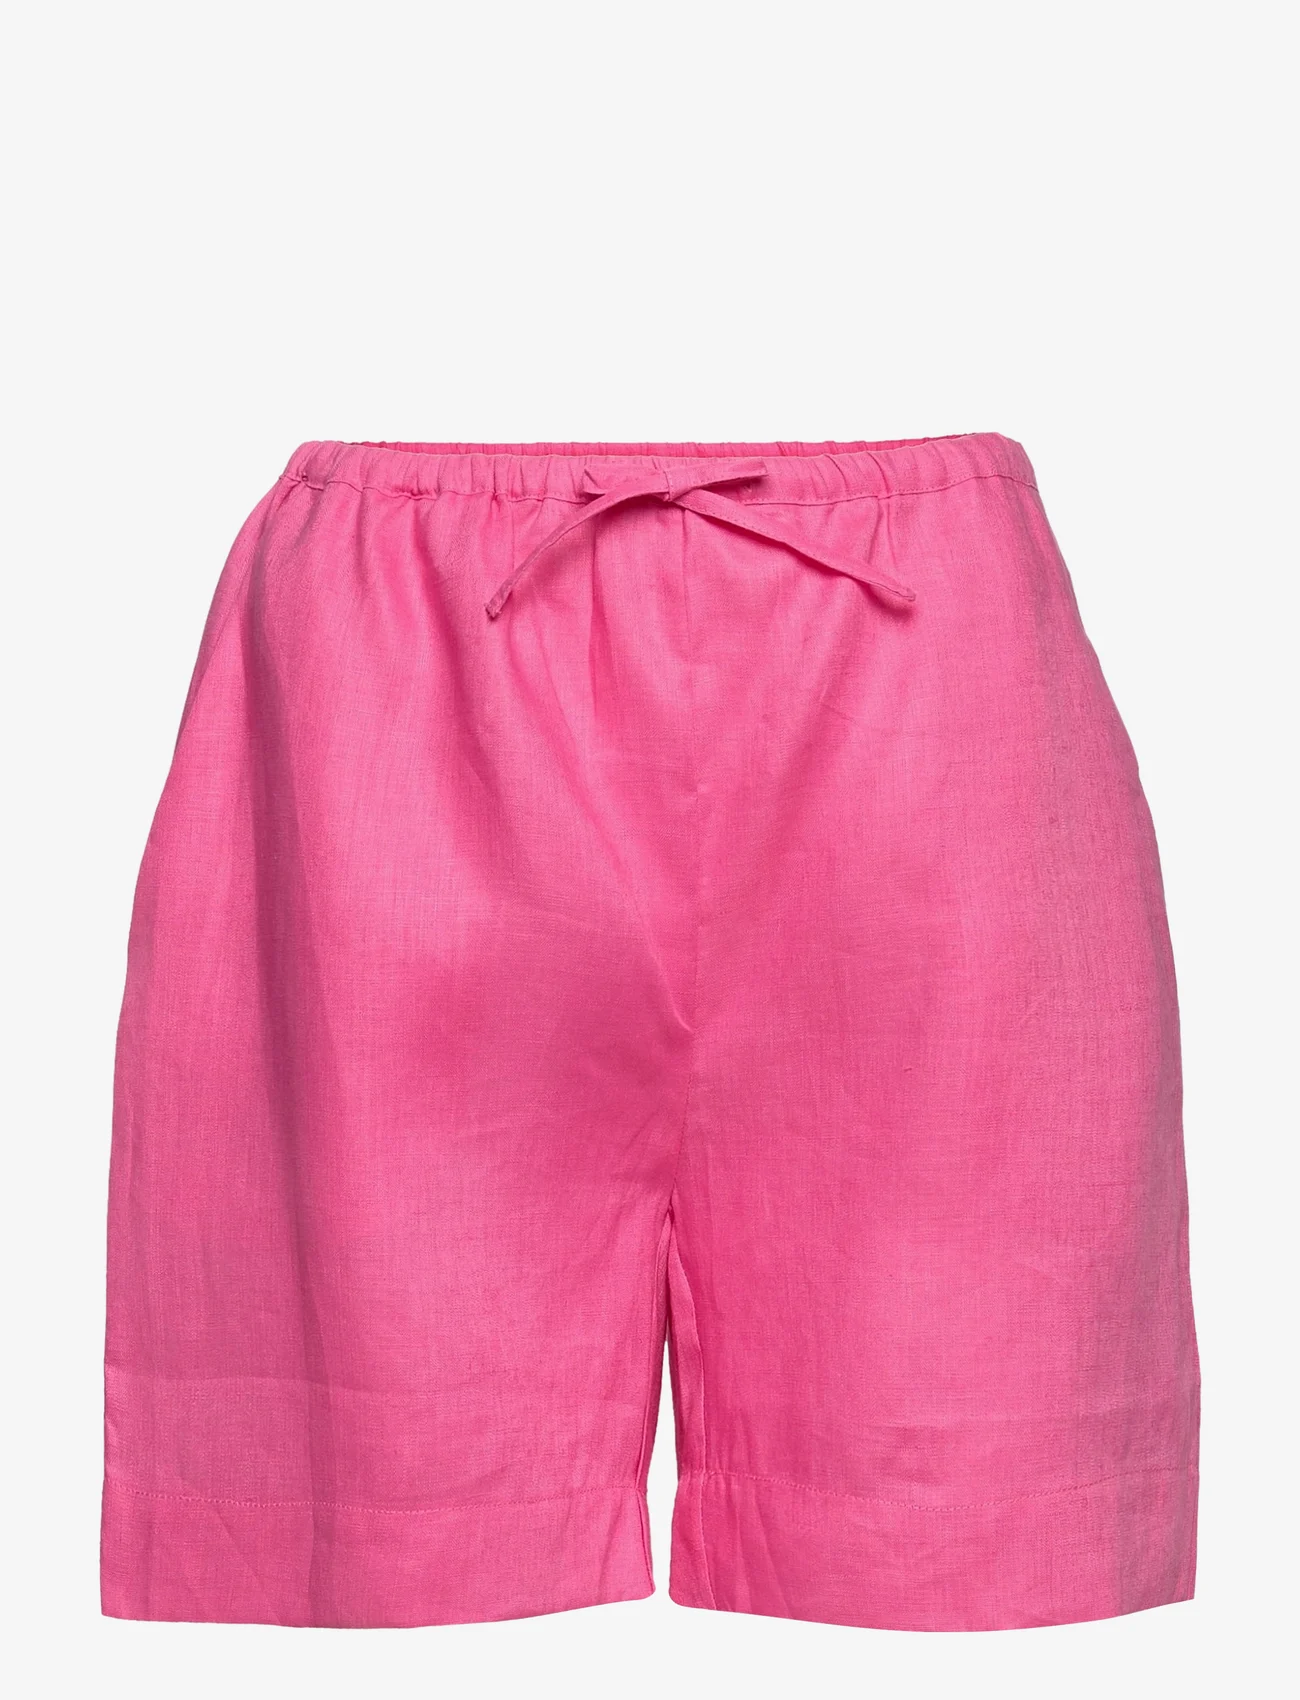 Hosbjerg - CAMILLE SHORTS - casual shorts - pink - 0